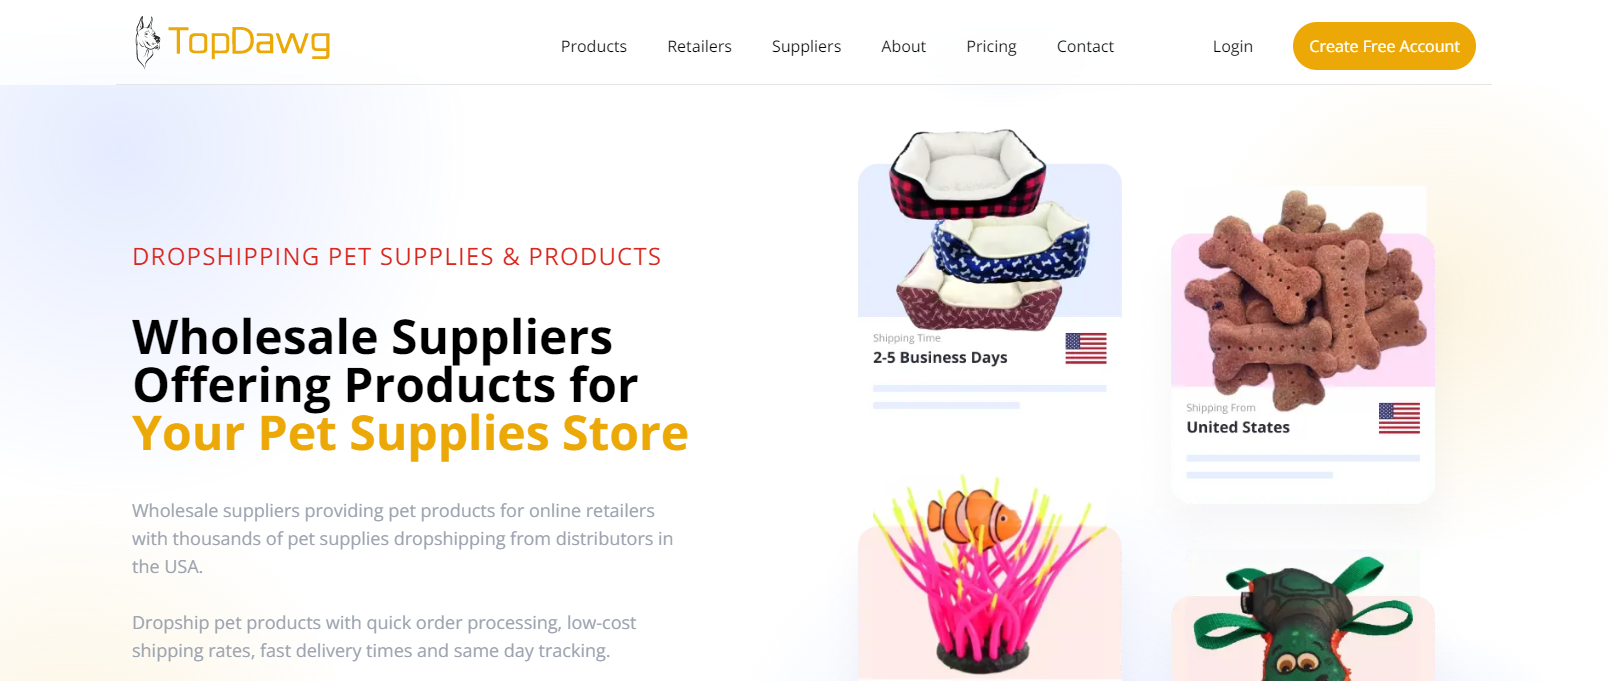 pet-dropshipping-suppliers-5-topdawg